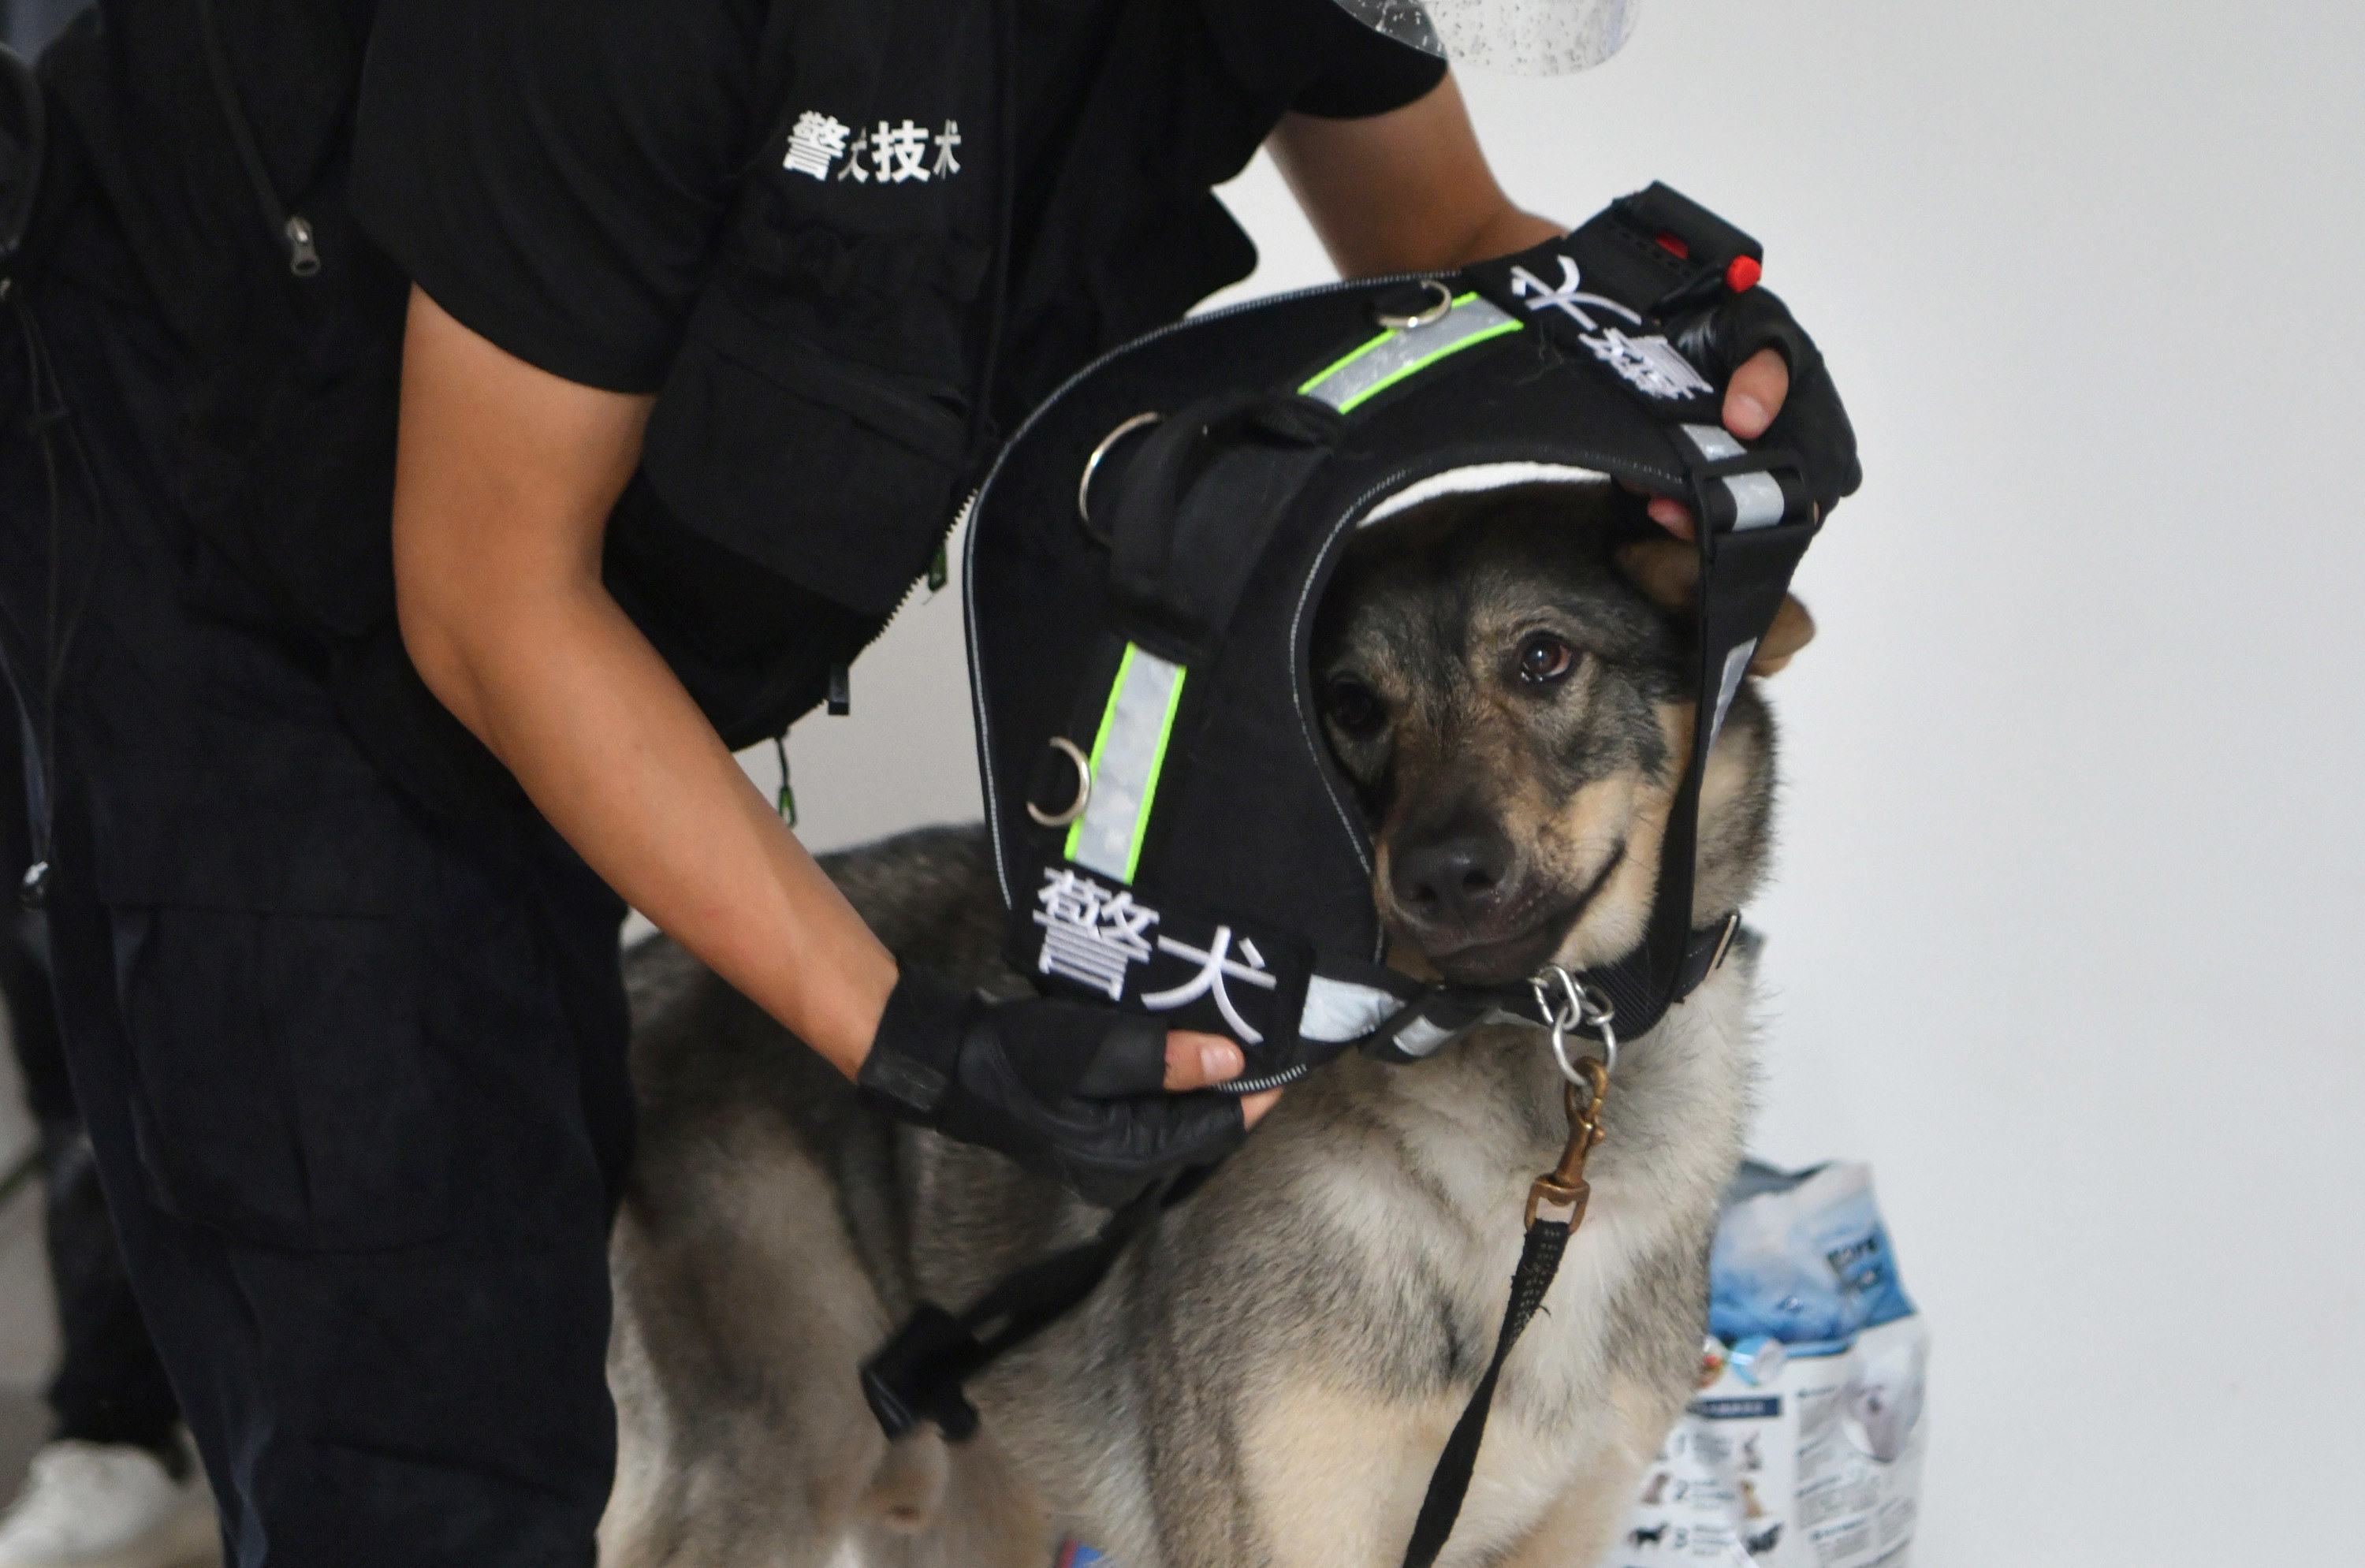 A drug detection dog waits patiently as it has its protection vest put on it